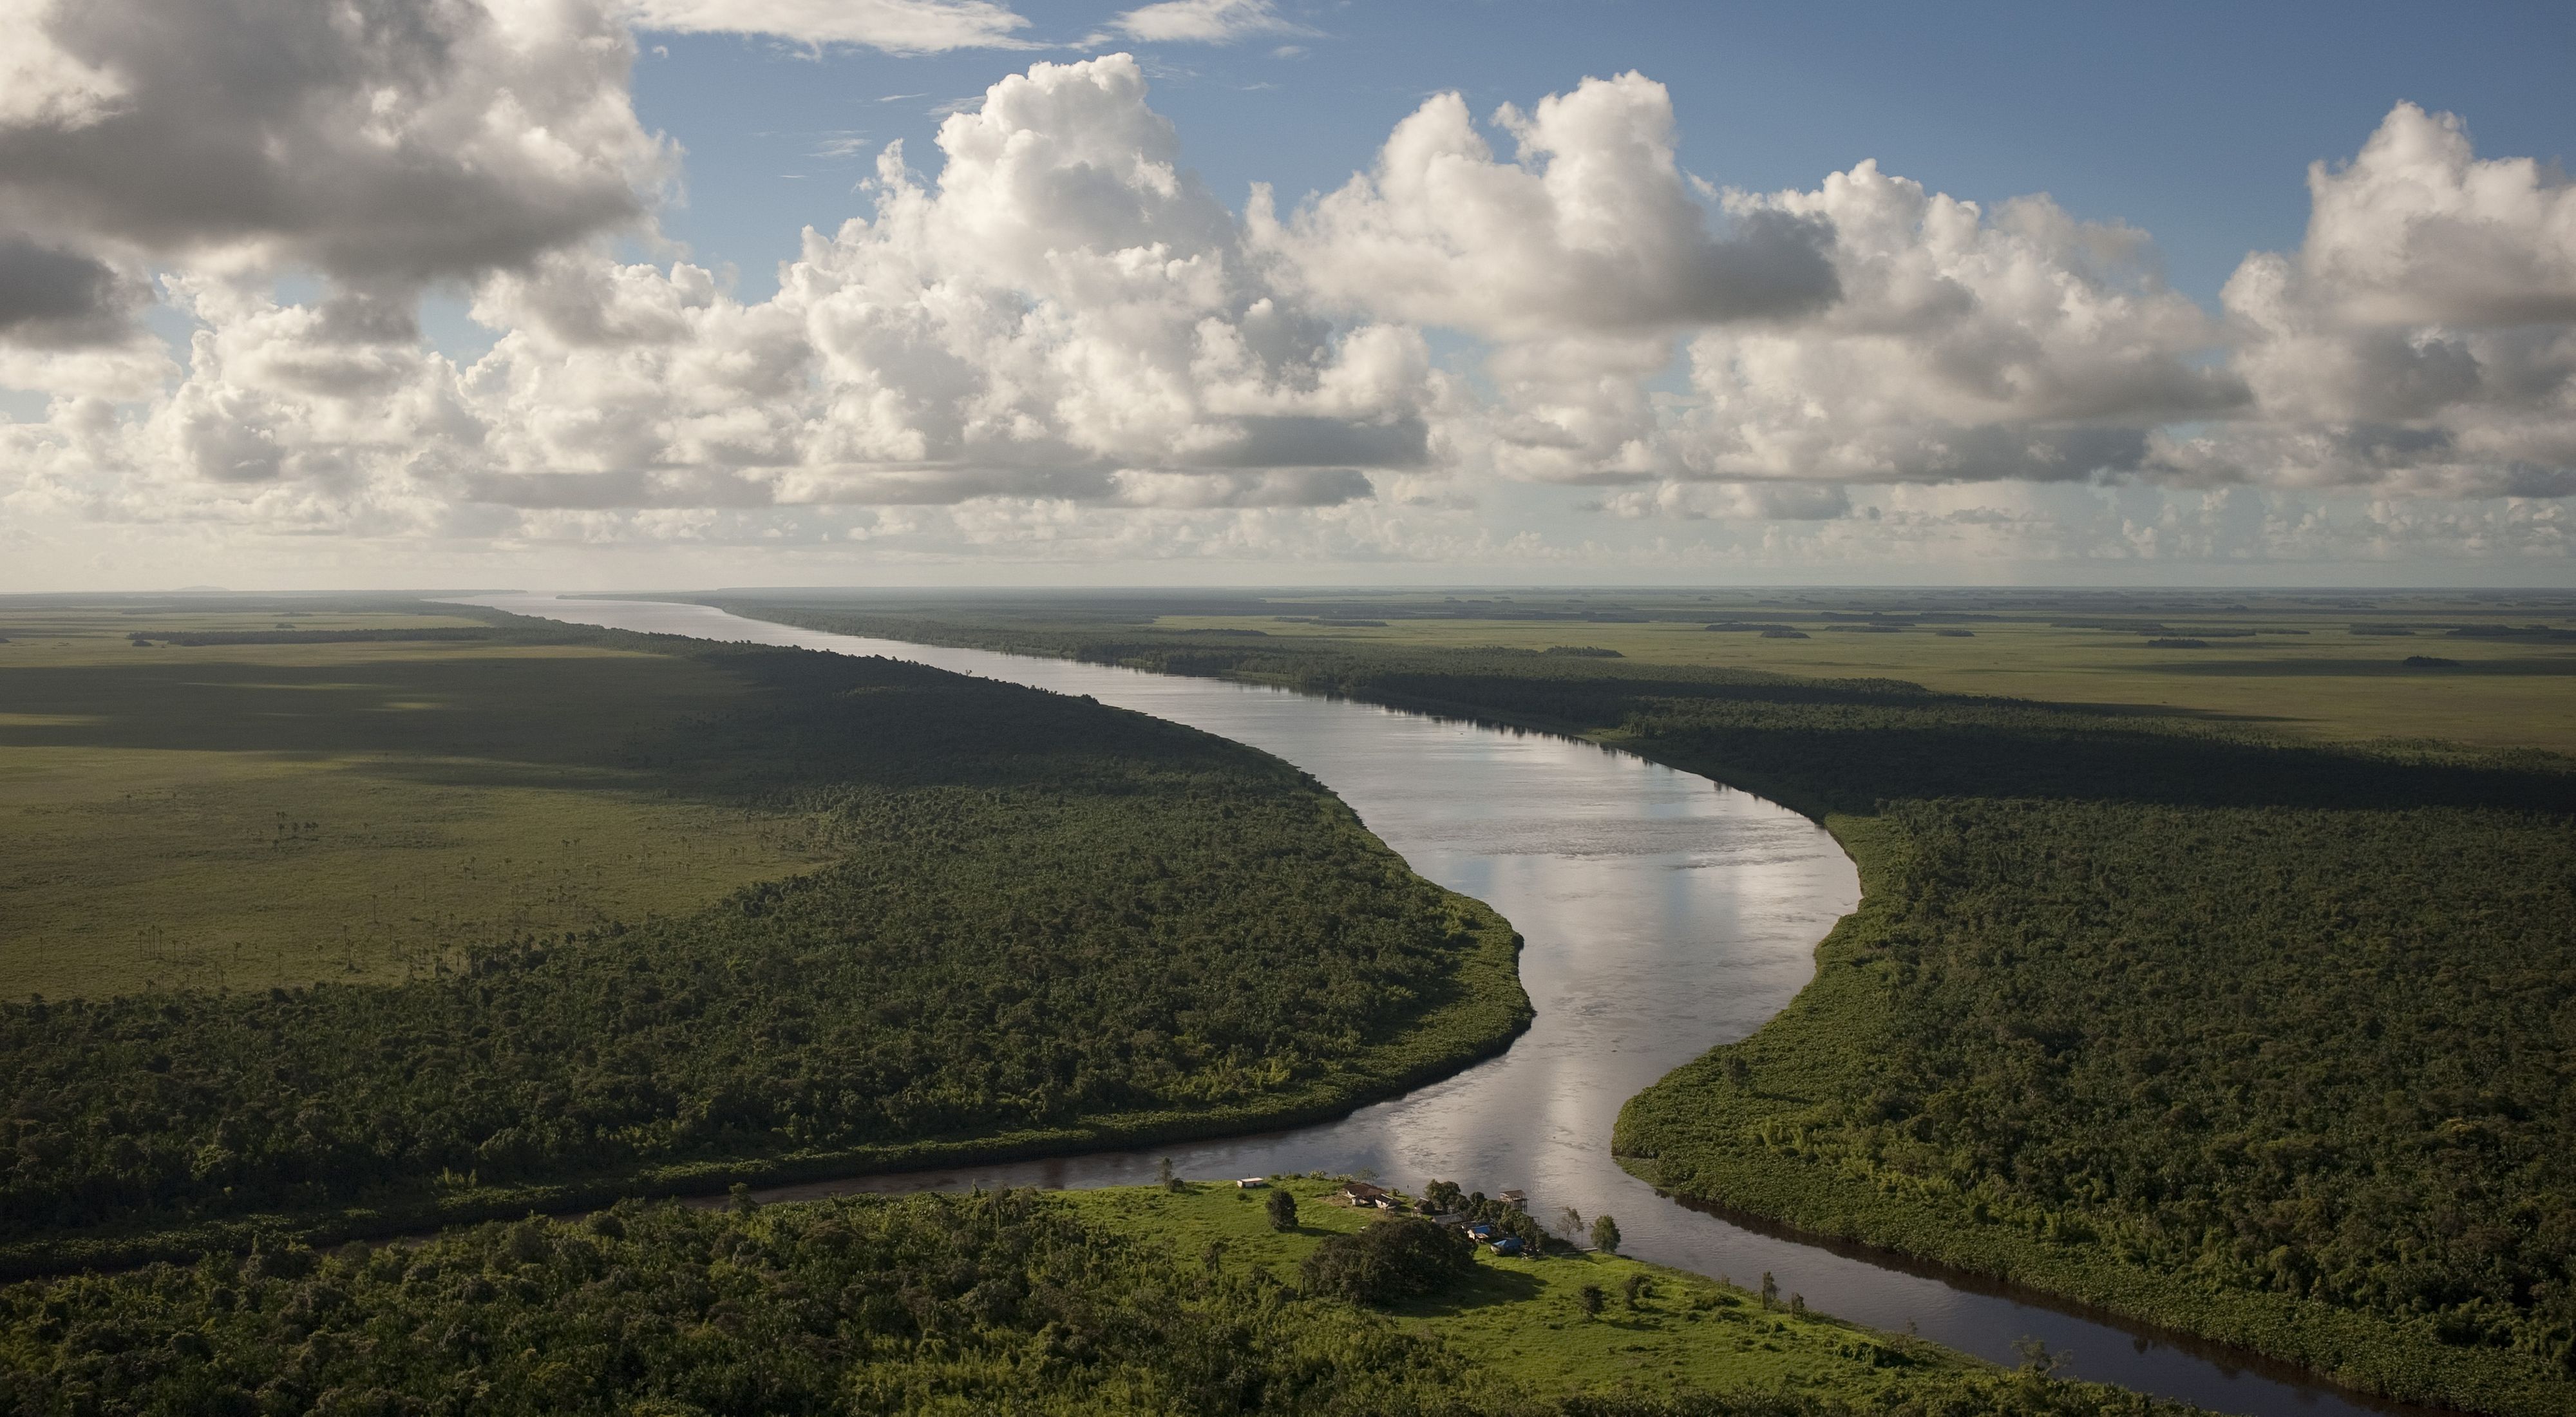 Aerial photo of Rio Curipi meeting the Rio Uaçá on its way to the Atlantic Ocean, in the Oiapoque indigenous region of the Brazilian Amazon.